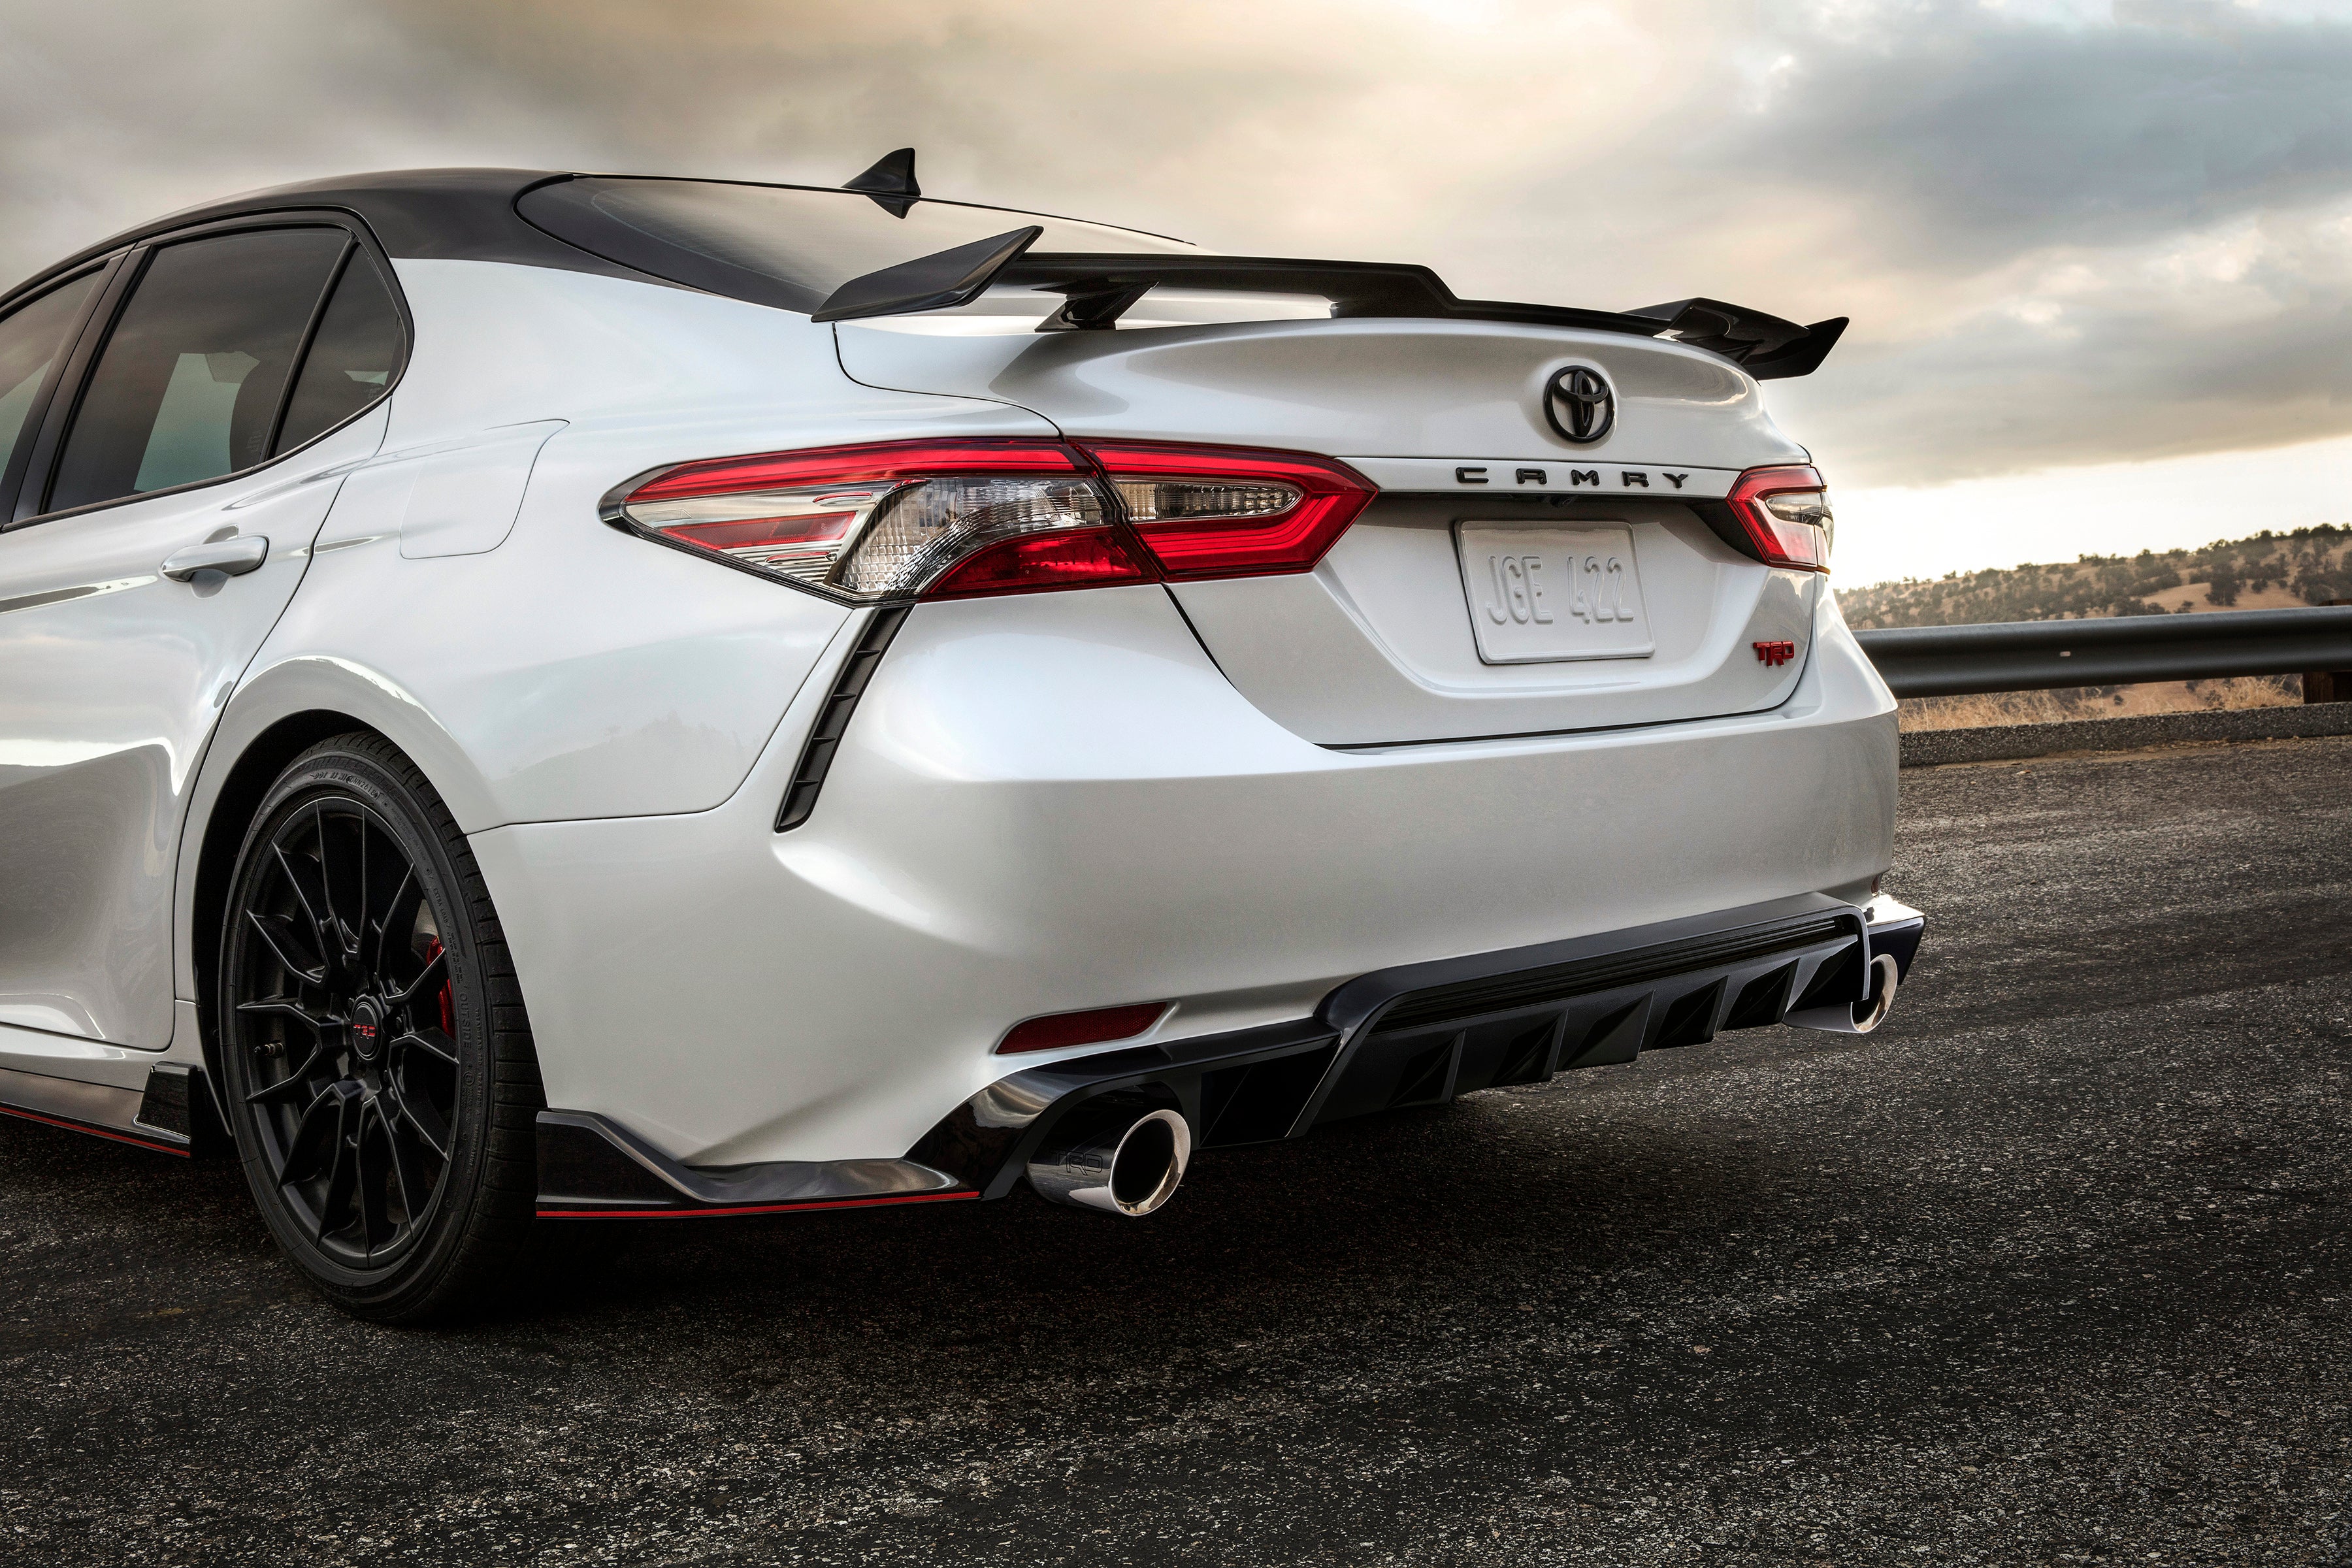 All New 2020 Toyota Camry TRD exterior design - Falmouth Toyota of Bourne, MA - Serving Cape Cod, Hyannis, Plymouth MA